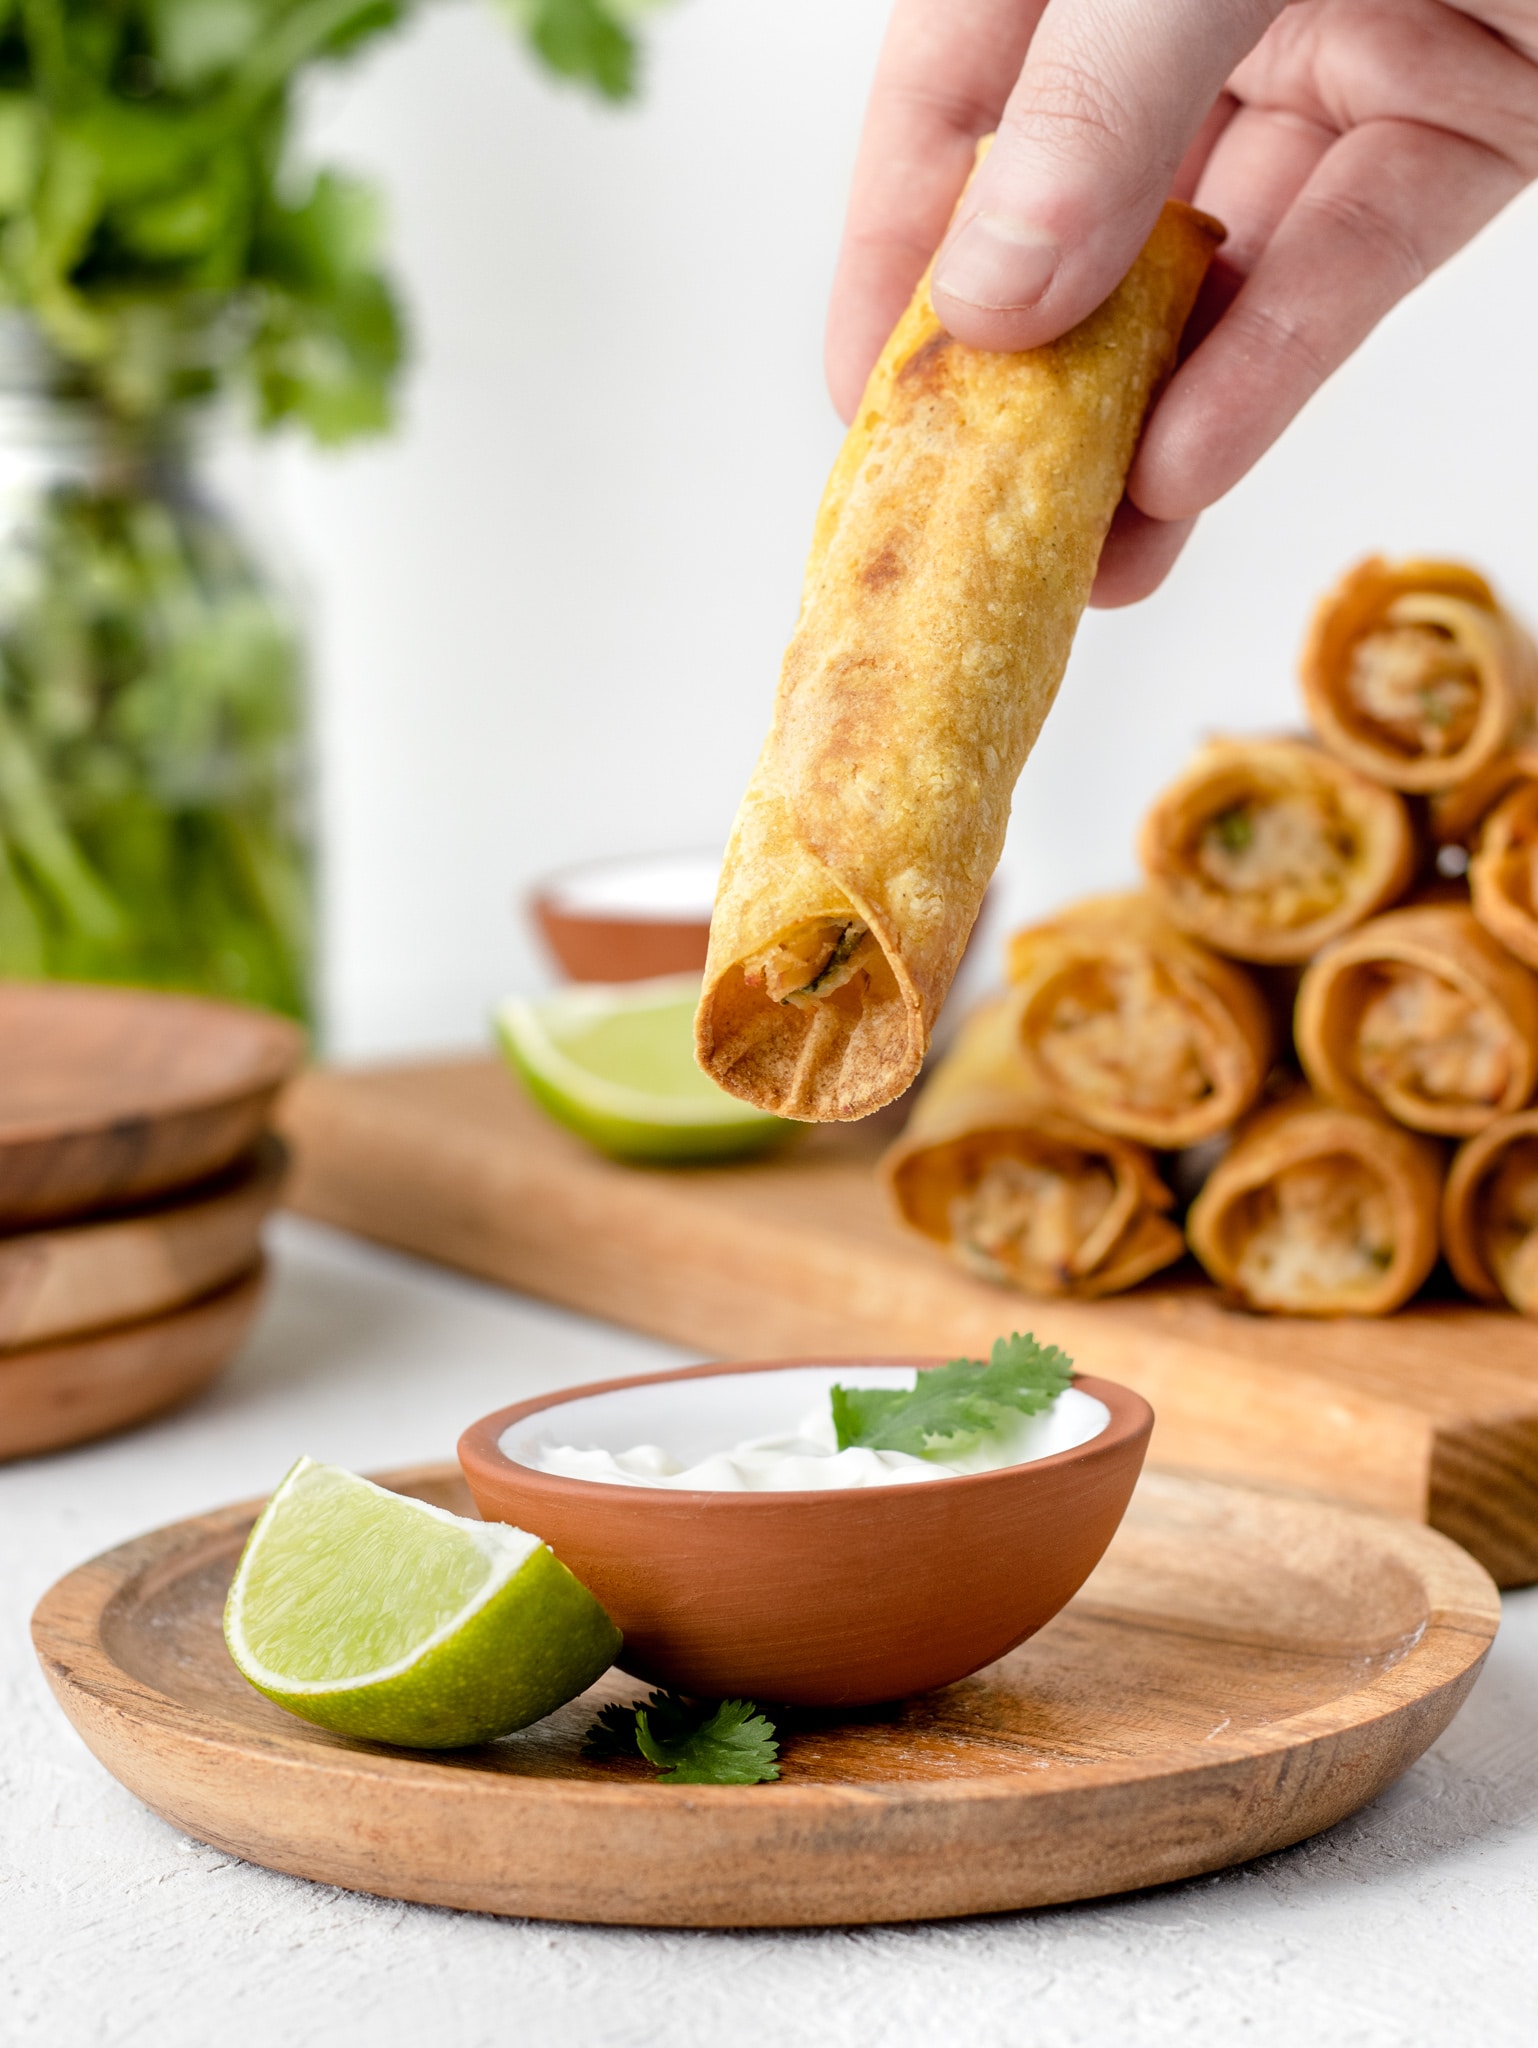 Taquito being dipped in sour cream.